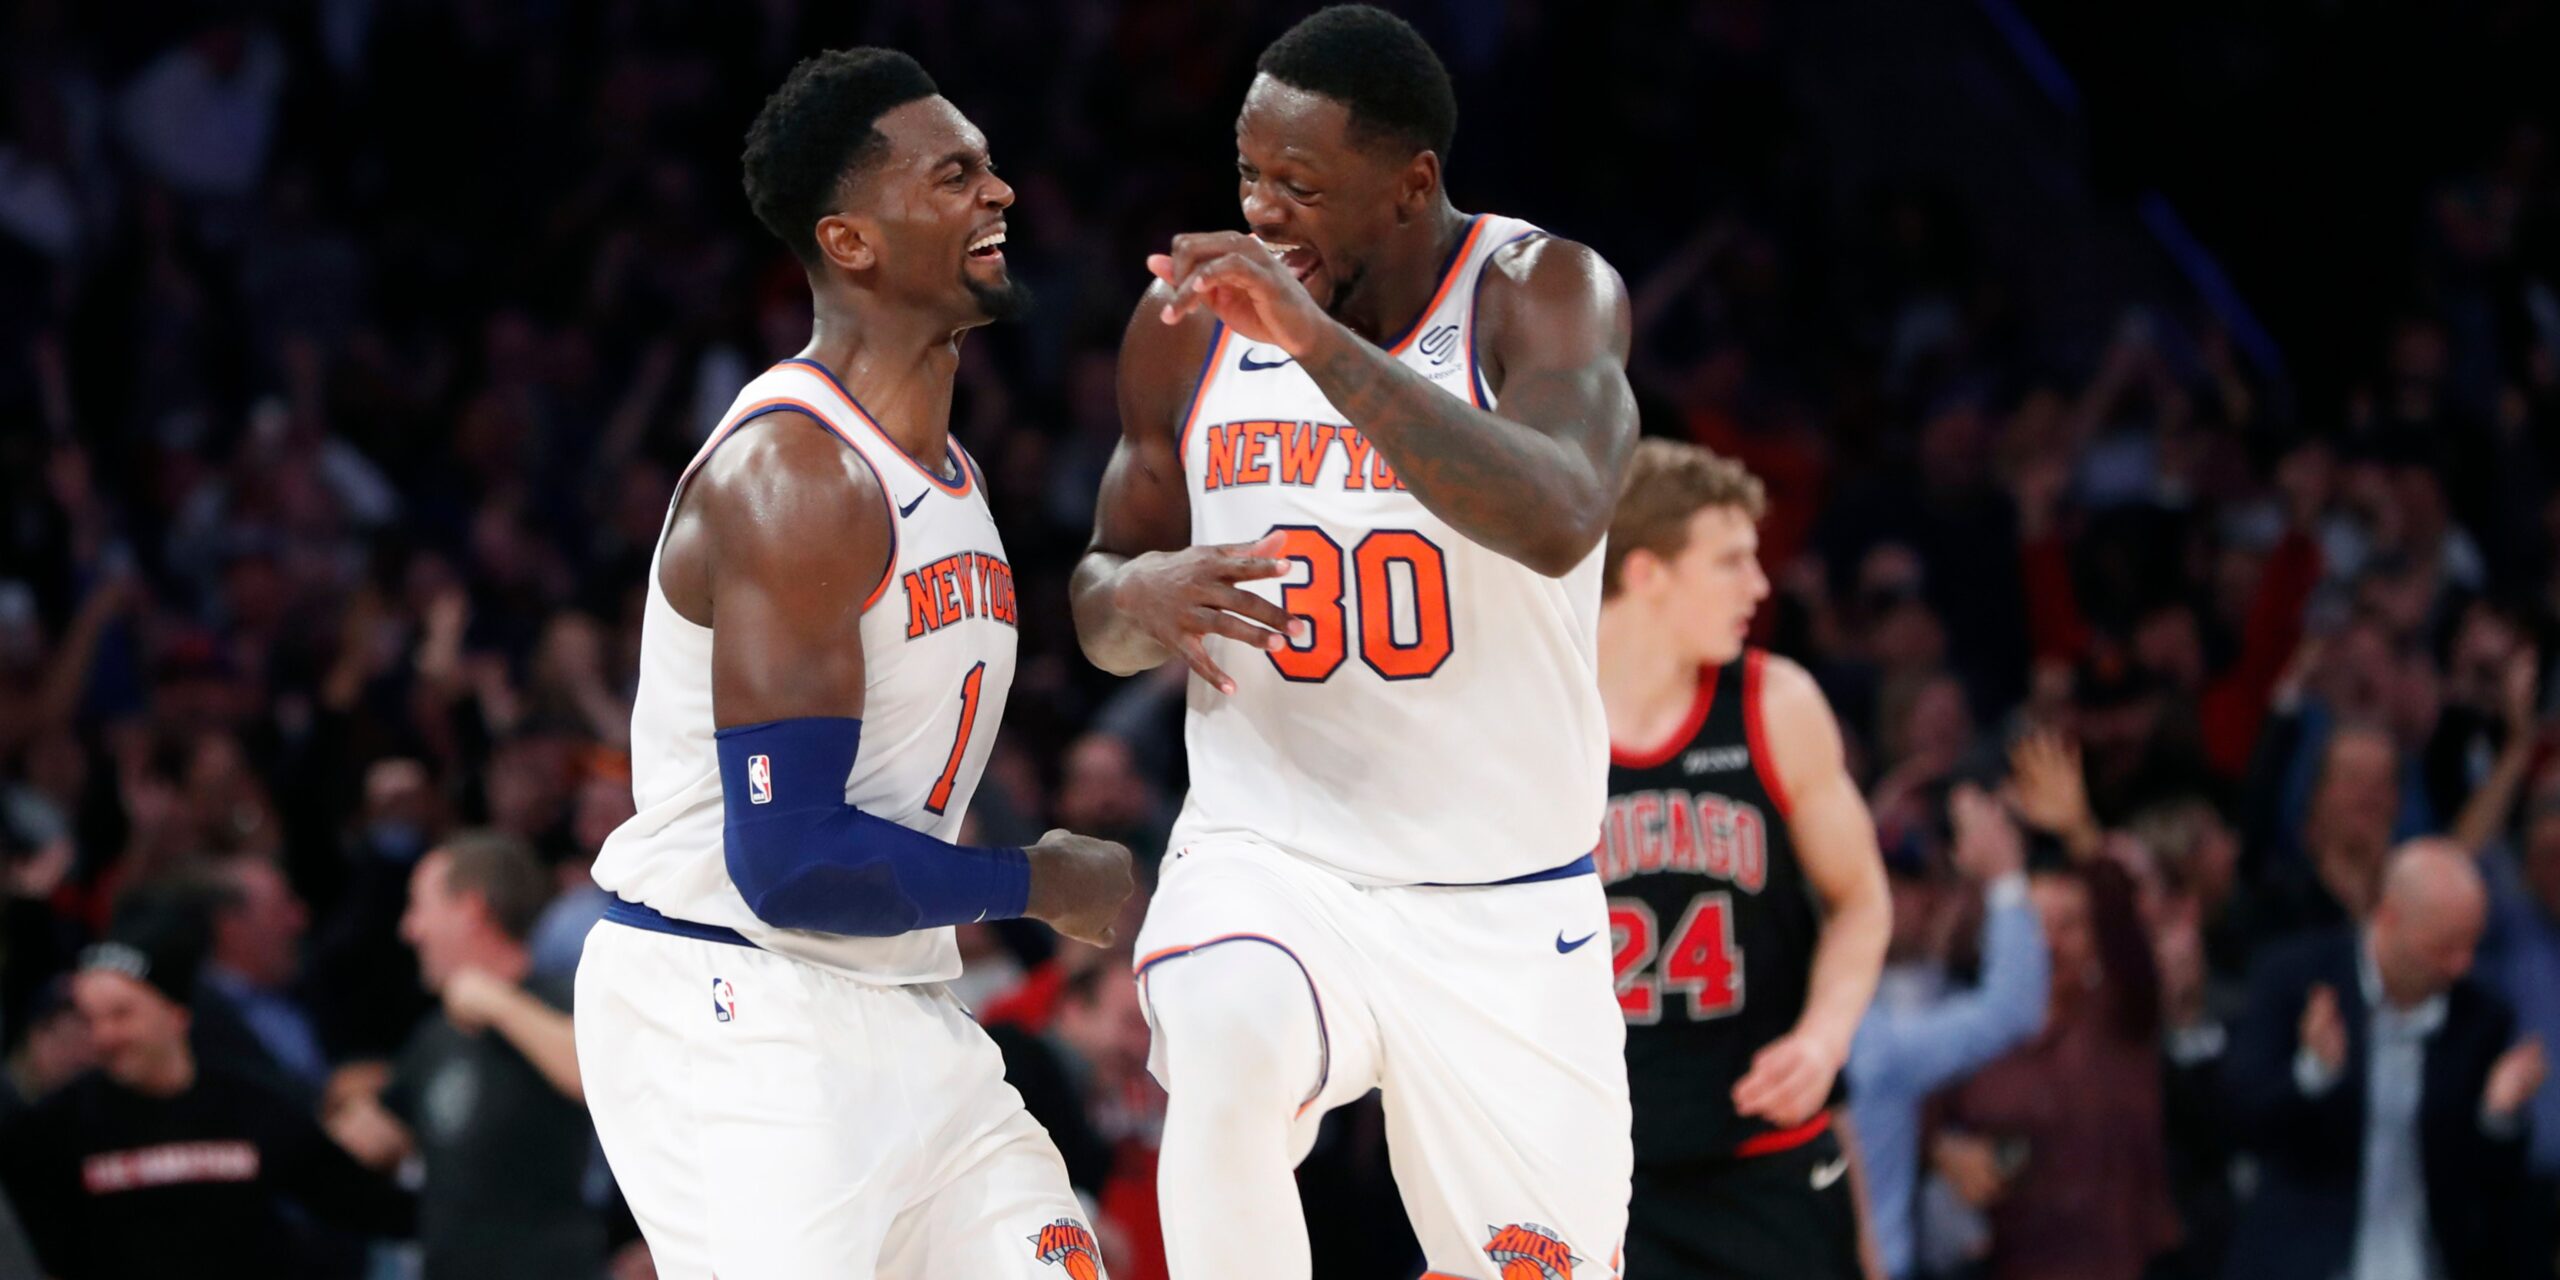 Julius Randle vs Bobby Portis: From Scrappy Underdogs to NBA Stars, Their Rivalry Heats Up in Knicks Clash